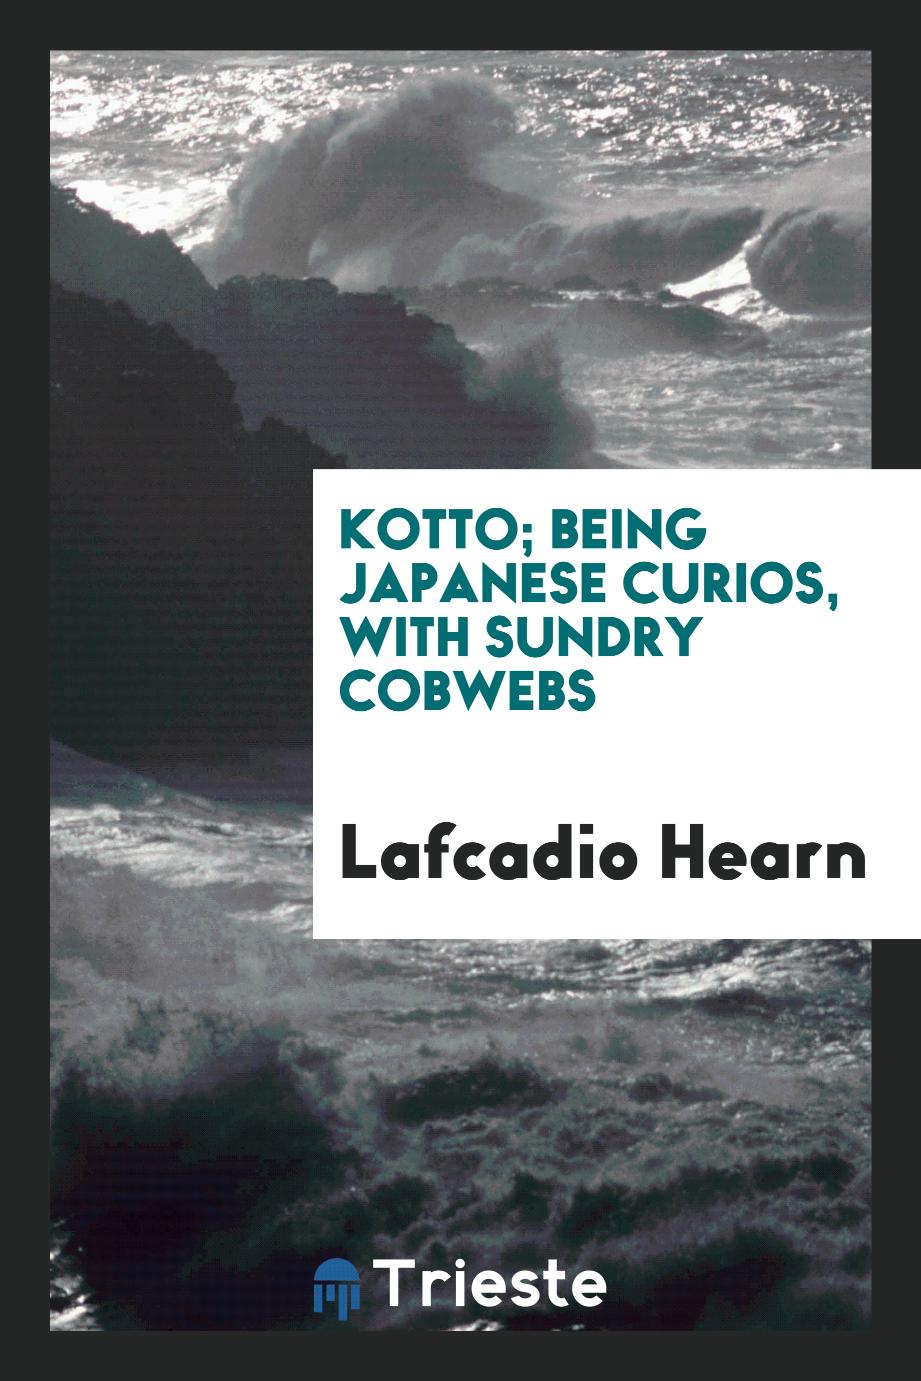 Kotto; being Japanese curios, with sundry cobwebs